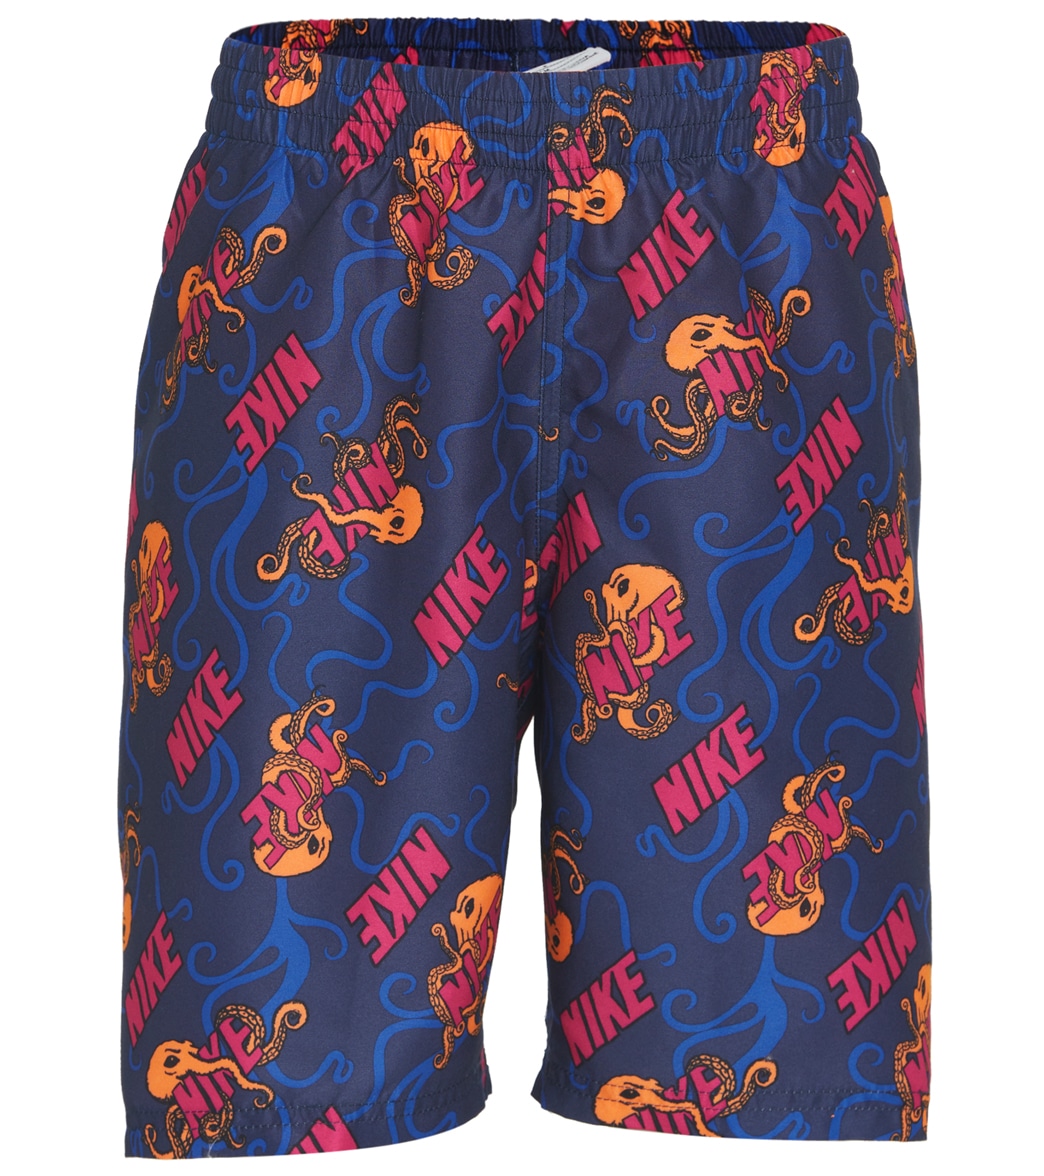 Nike Boys' Octologo Packable 8 Volley Short Big Kid - Midnight Navy Large Polyester - Swimoutlet.com